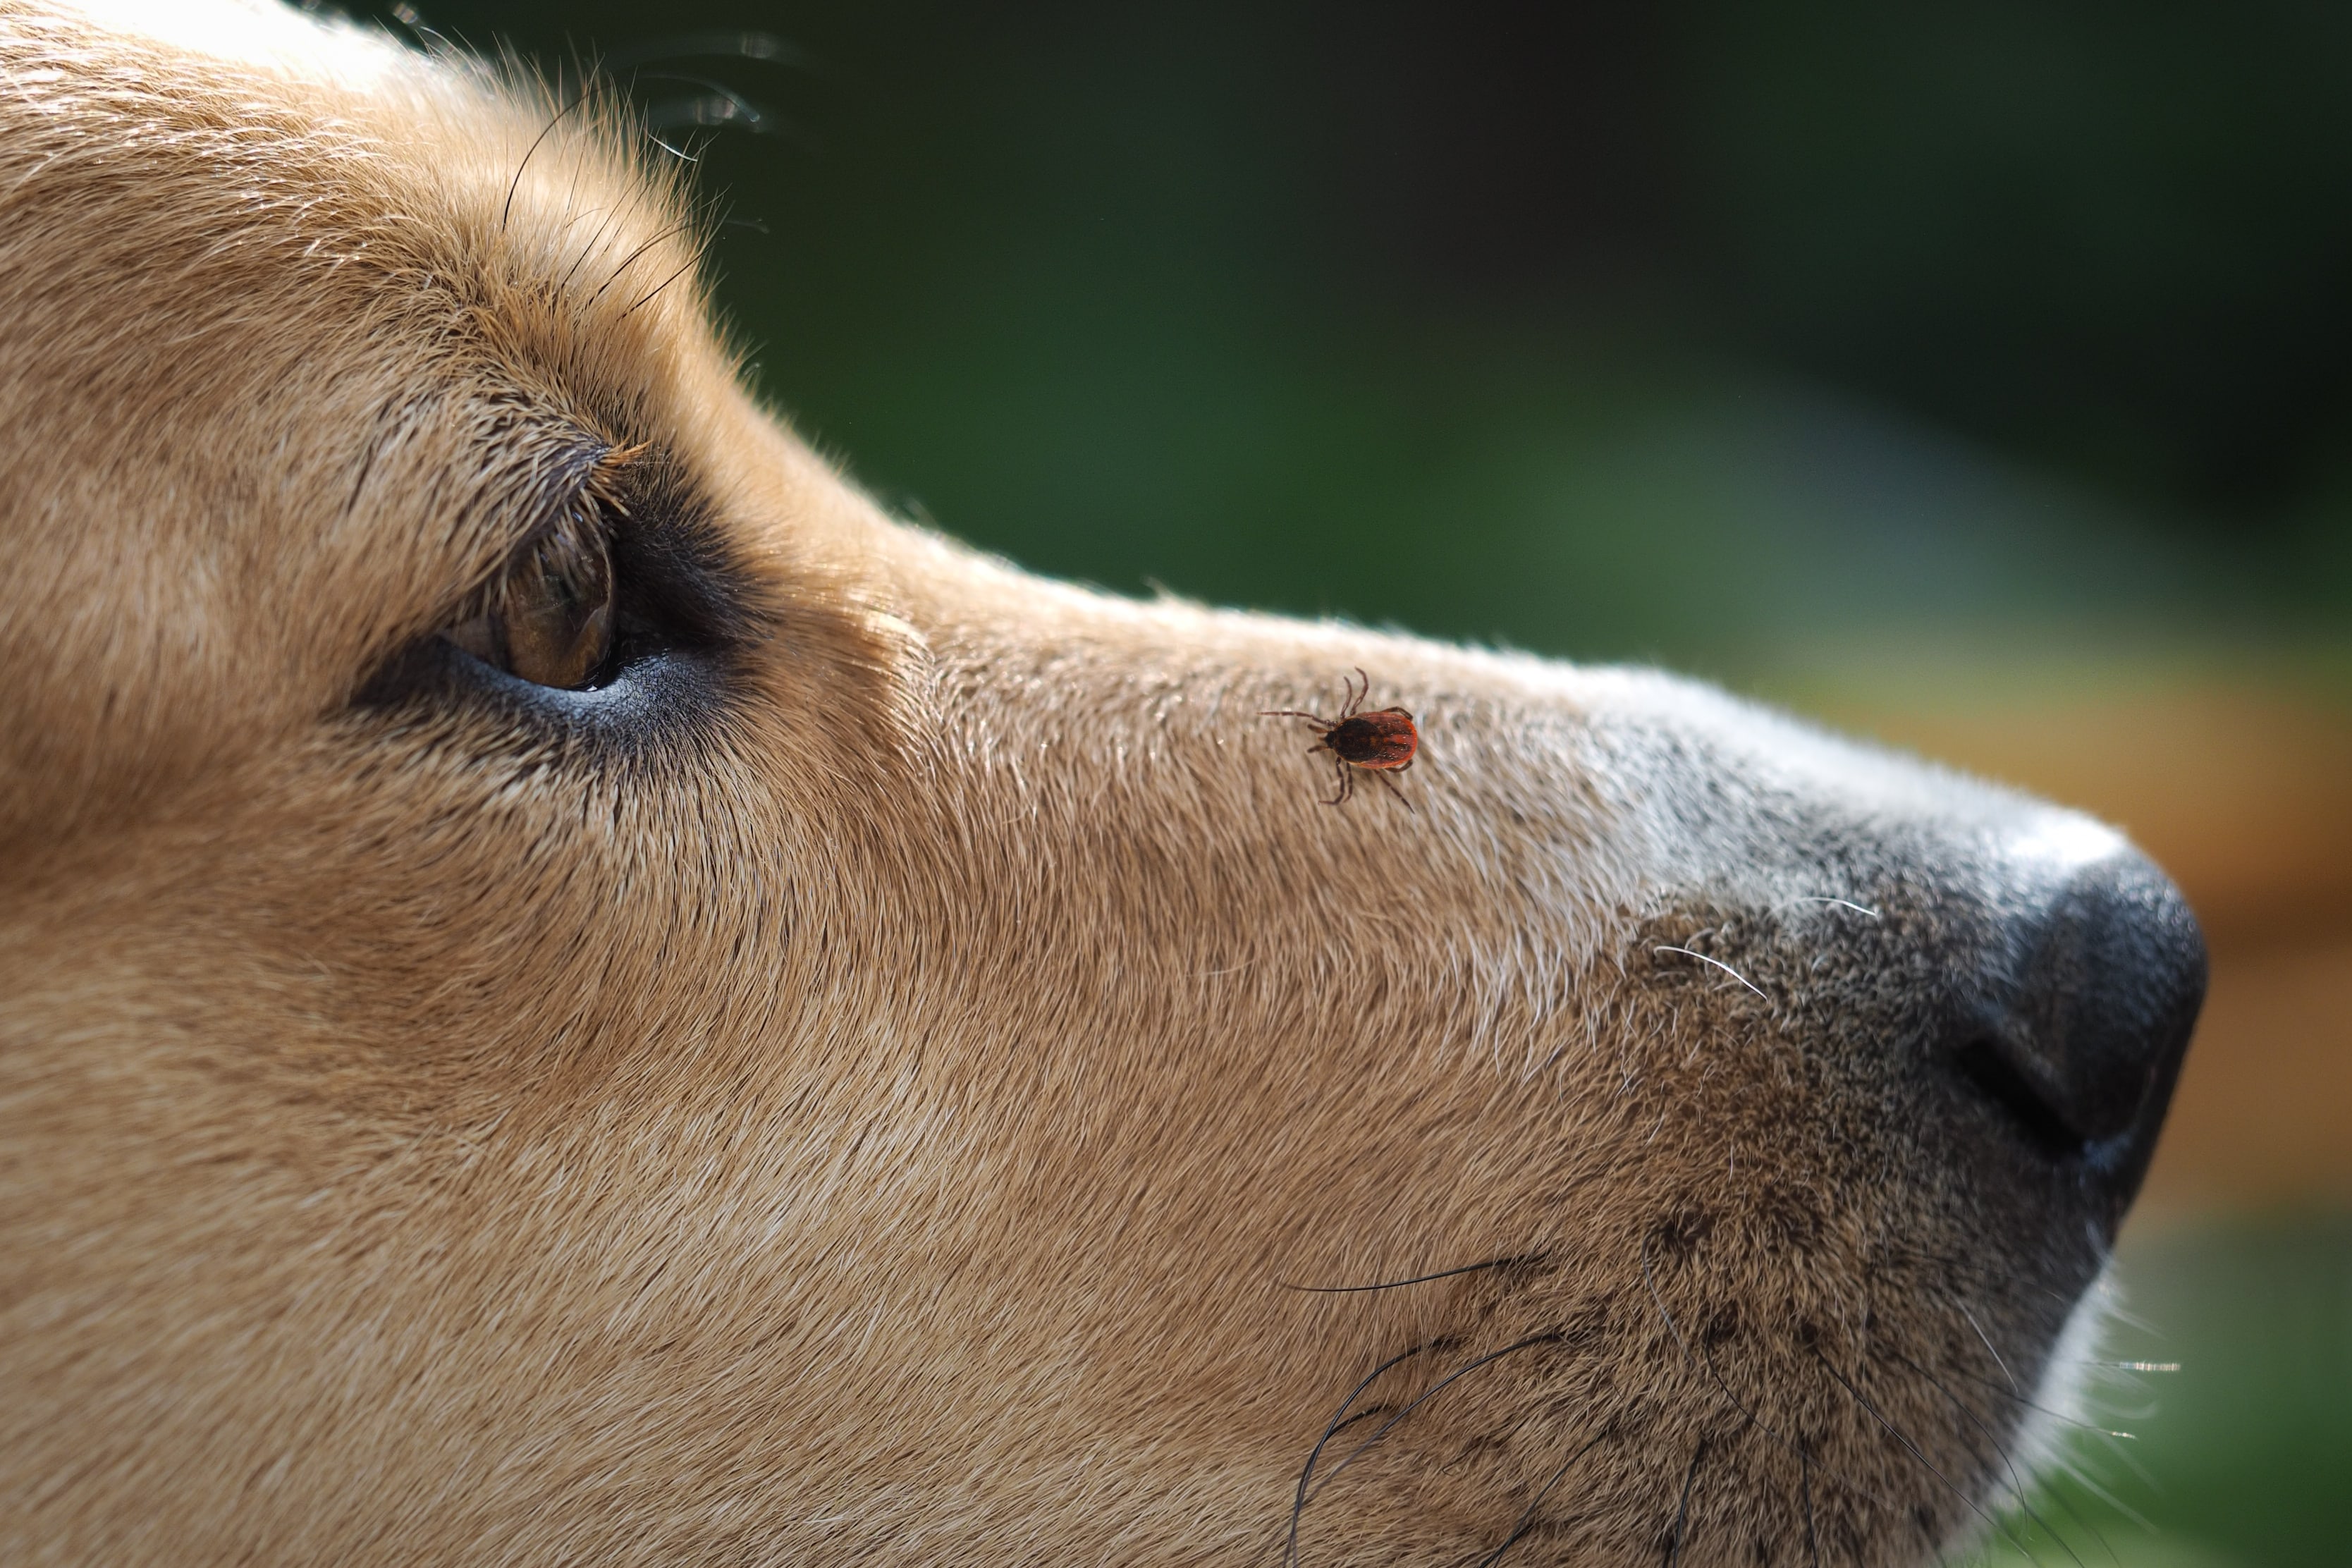 a close-up of a tick resting on the face of a brown dog